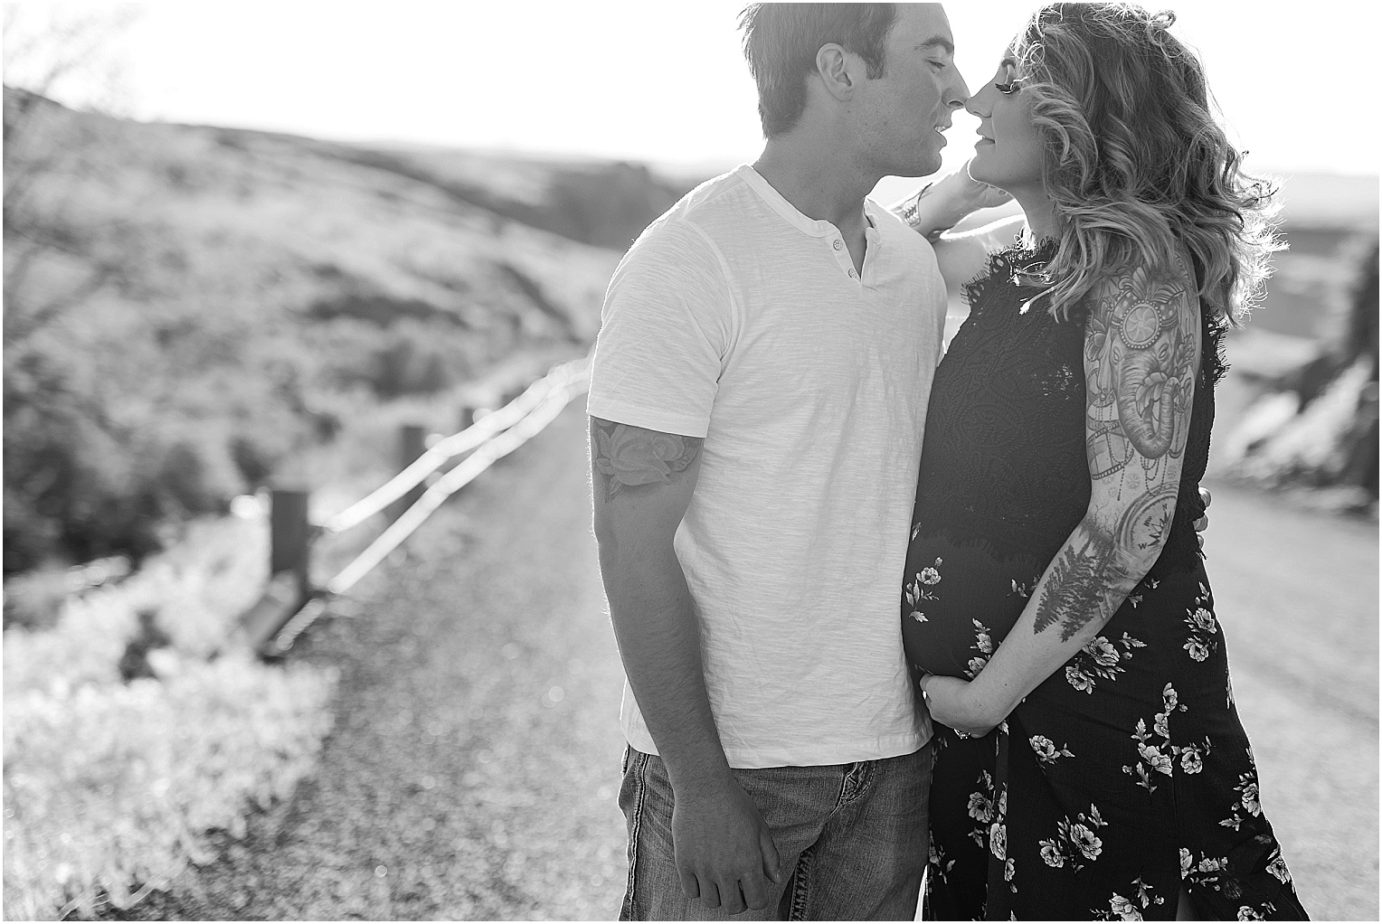 Vantage Crags Maternity Session mom in a skirt and chopped lace top